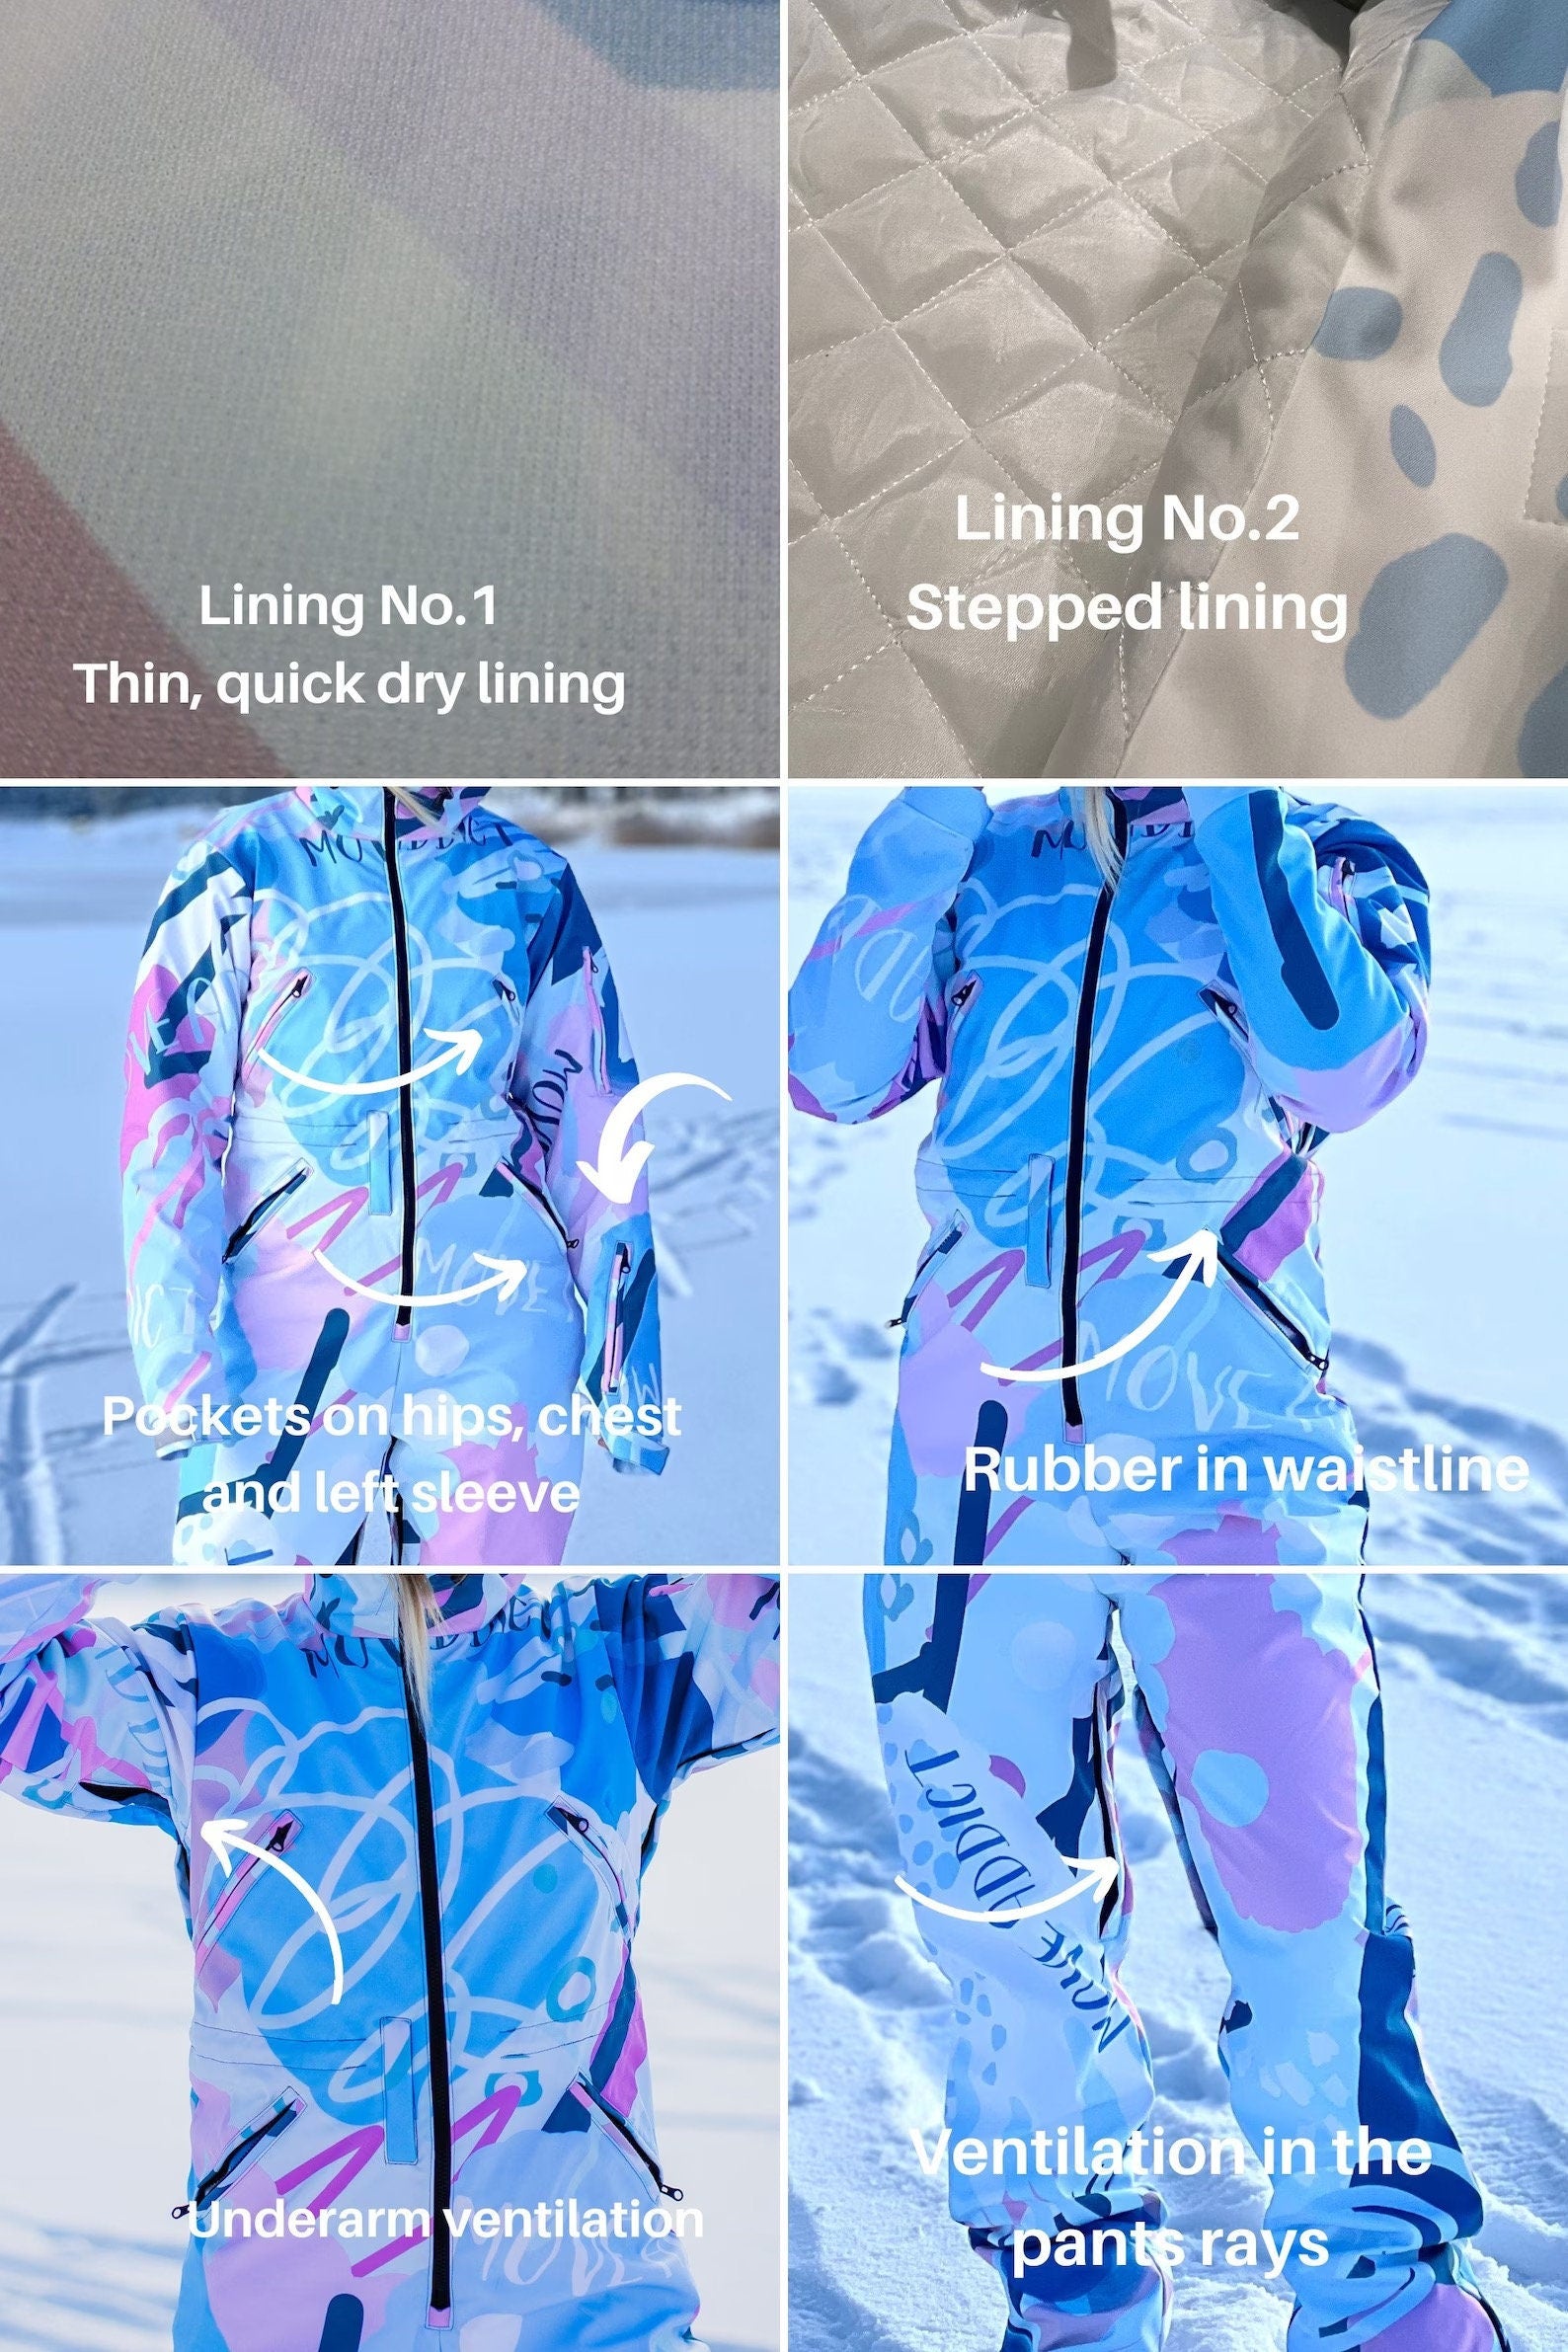 SET: Light Pink Winter Ski Jumpsuit, Snowboard Clothes, Snowboard suit, Skiing Overall, Women Mountain's clothes, Winter Thermal underwear